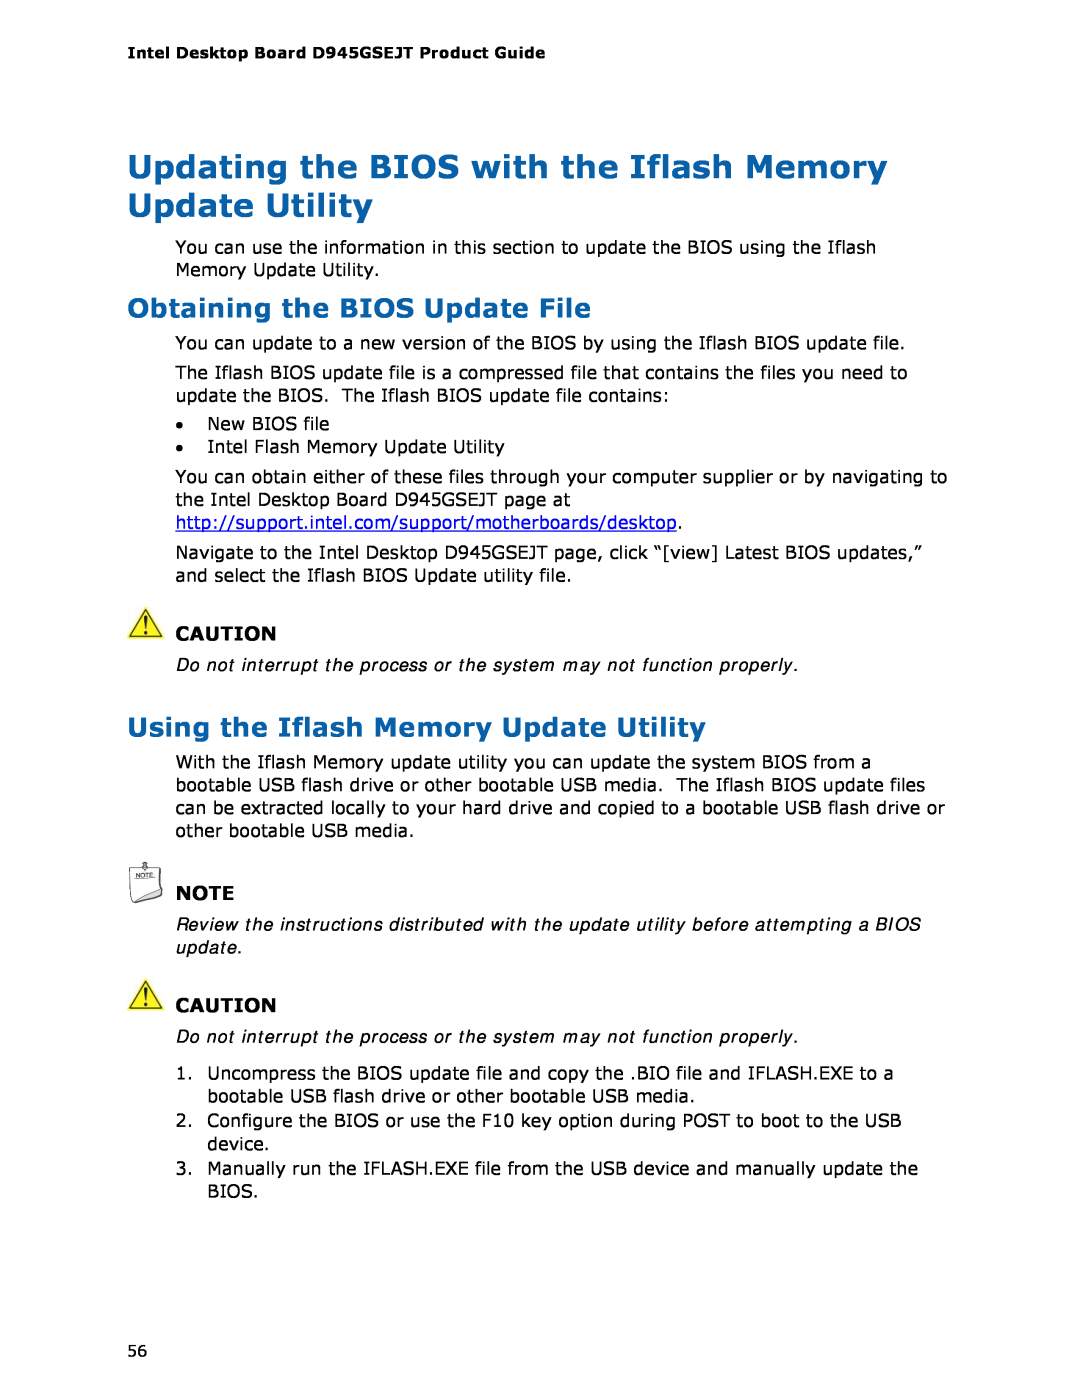 Intel D945GSEJT manual Obtaining the BIOS Update File, Using the Iflash Memory Update Utility 